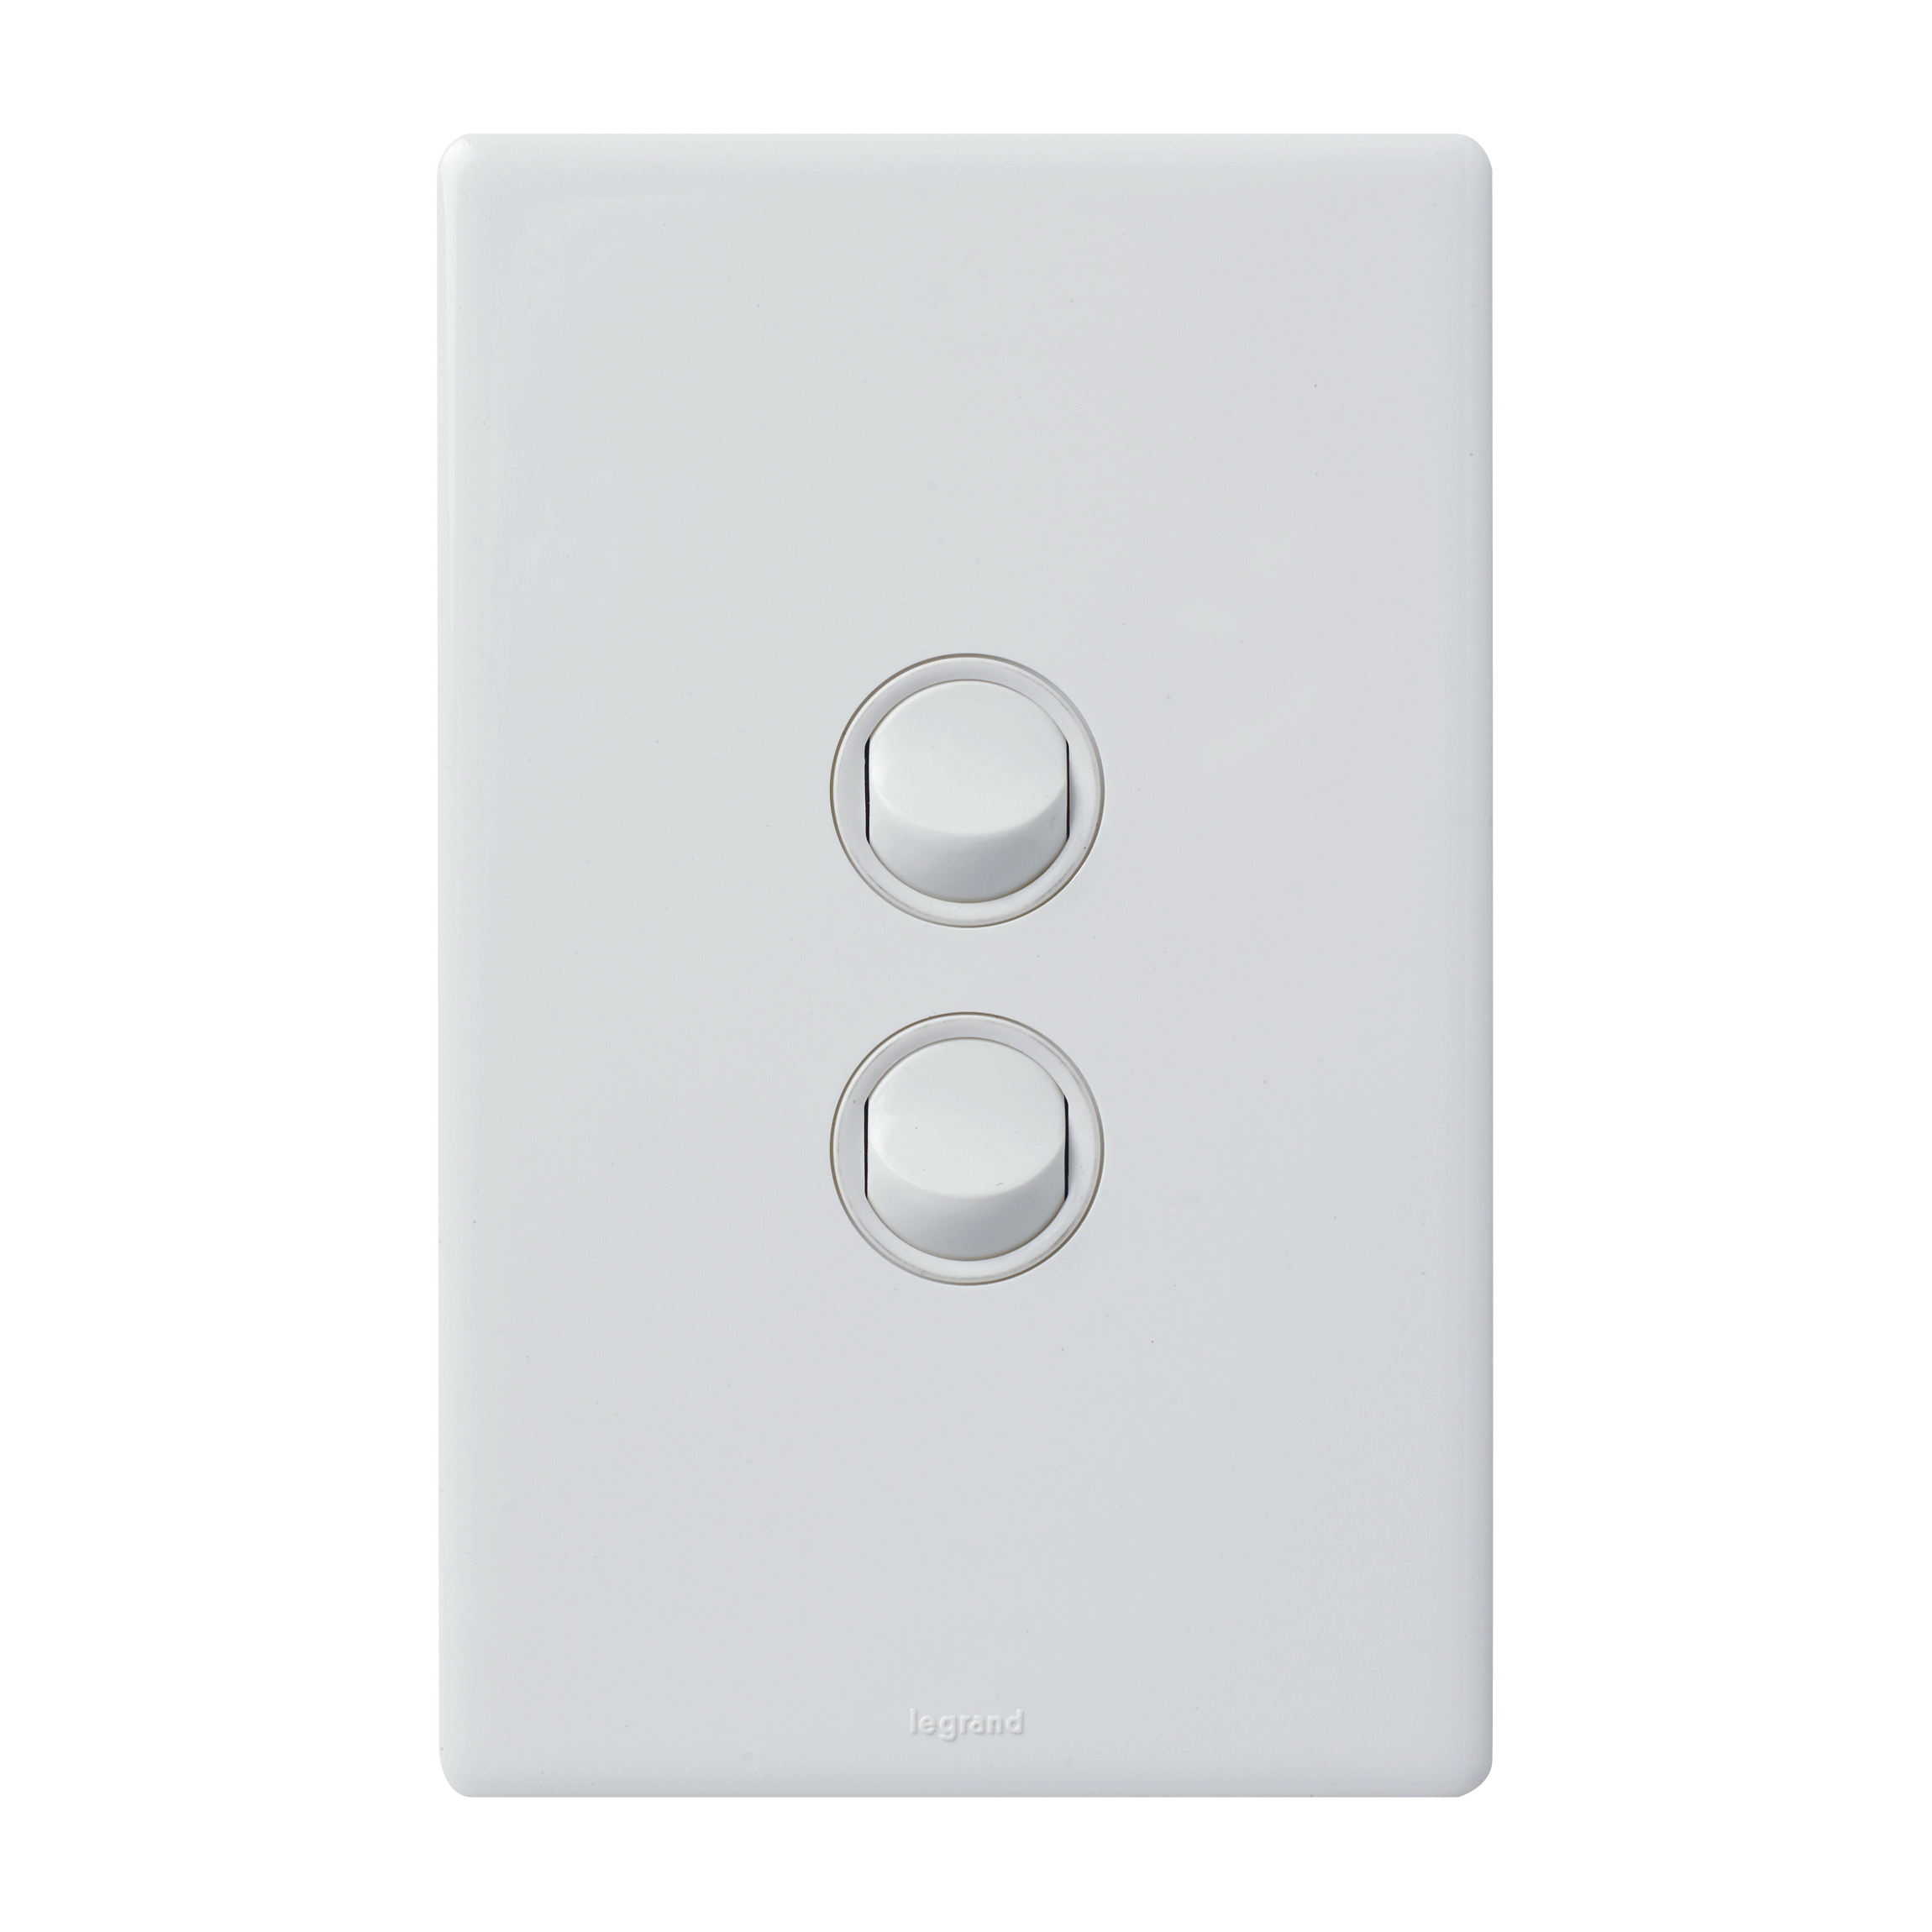 16A 2-GANG SWITCH WHITE, EXCEL LIFE